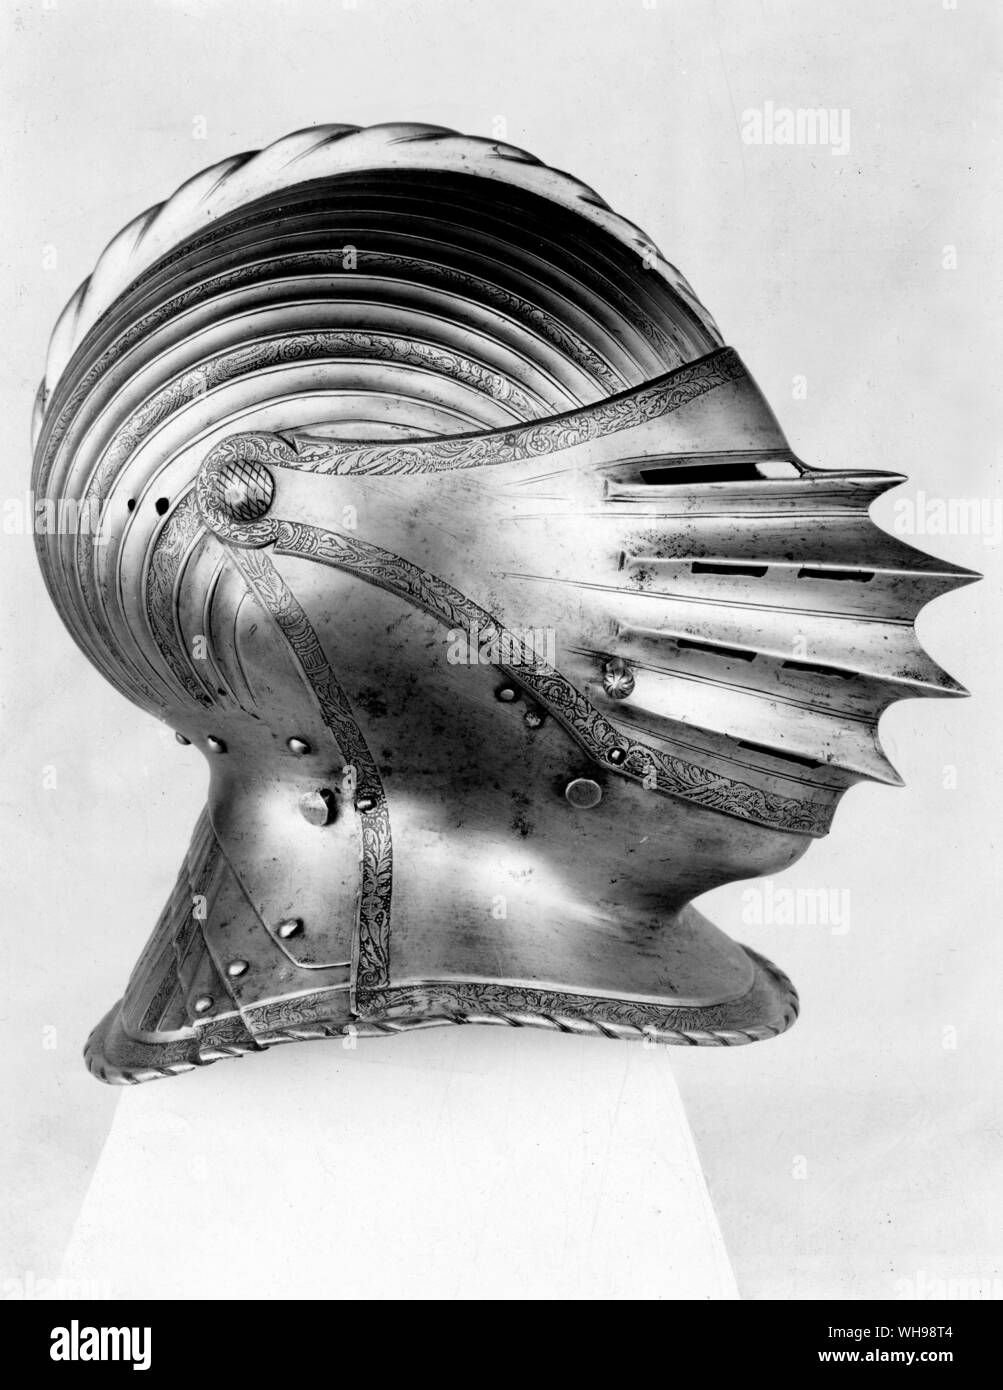 European warfare/The high middle ages: A German helmet, c.1520. Stock Photo